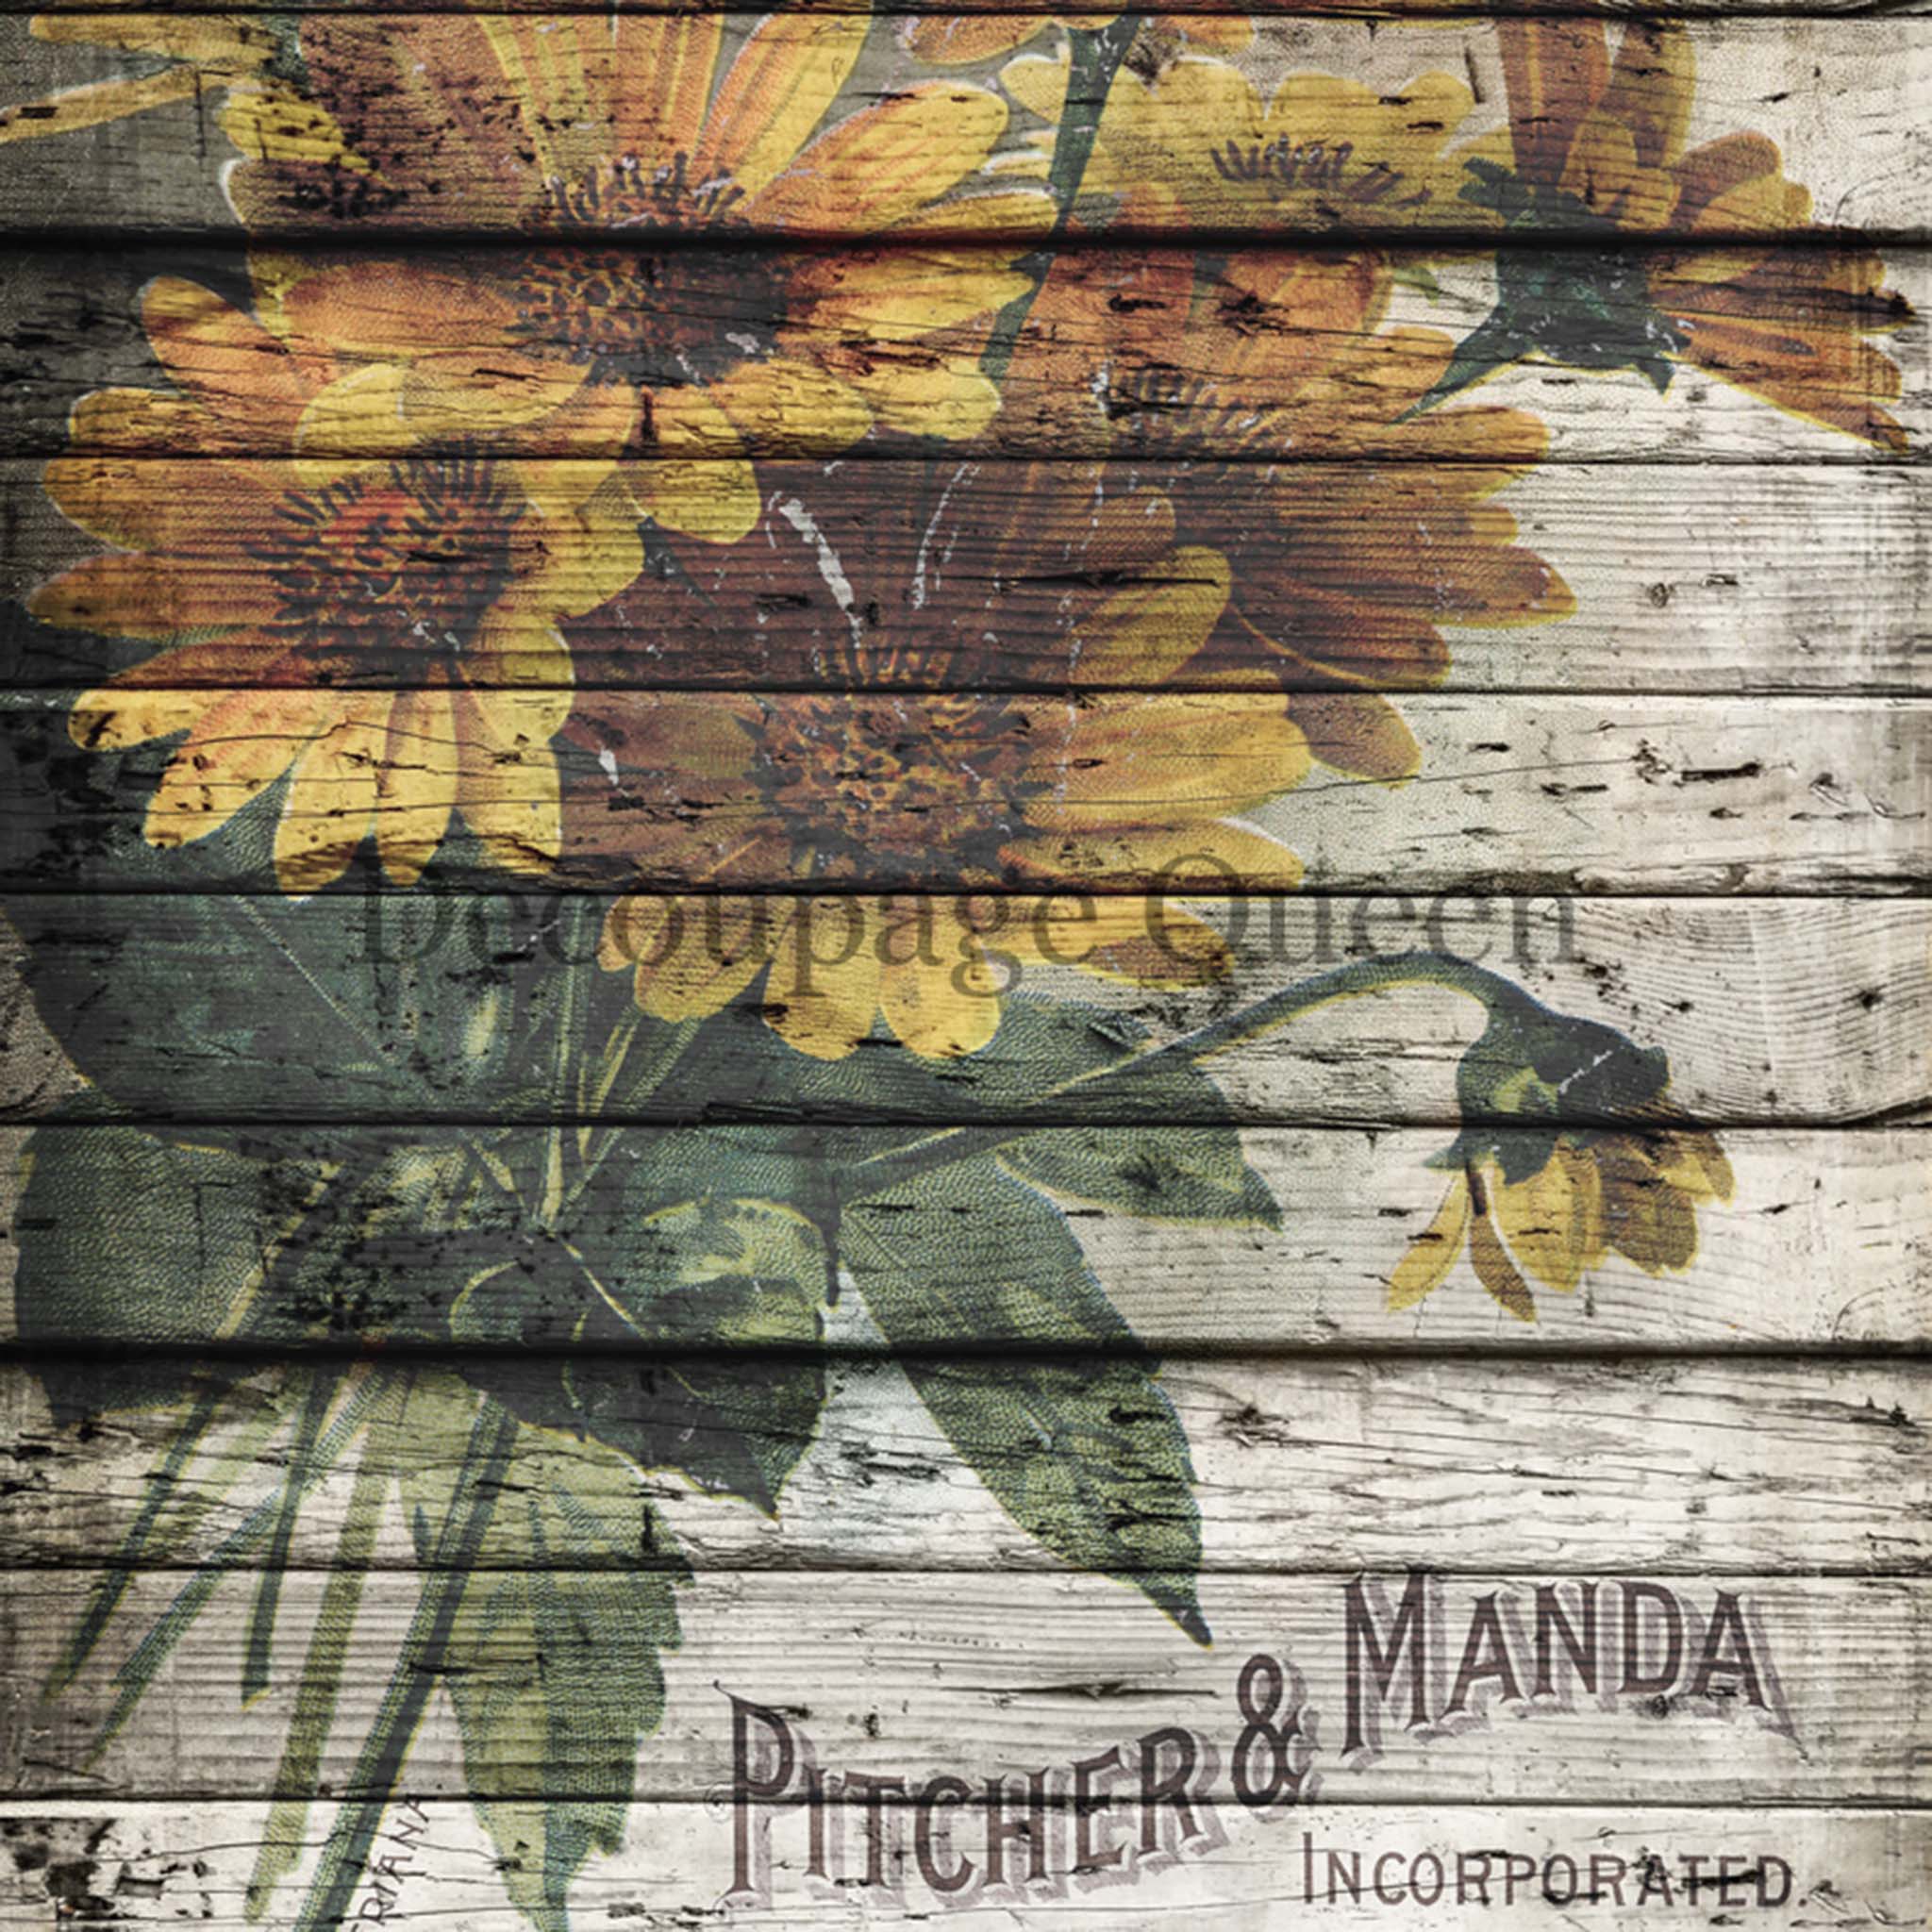 A2 rice paper design that features weathered wood with a bouquet of yellow flowers and printed text that reads: Pitcher & Manda Incorporated, Short Hills, New Jersey, USA.